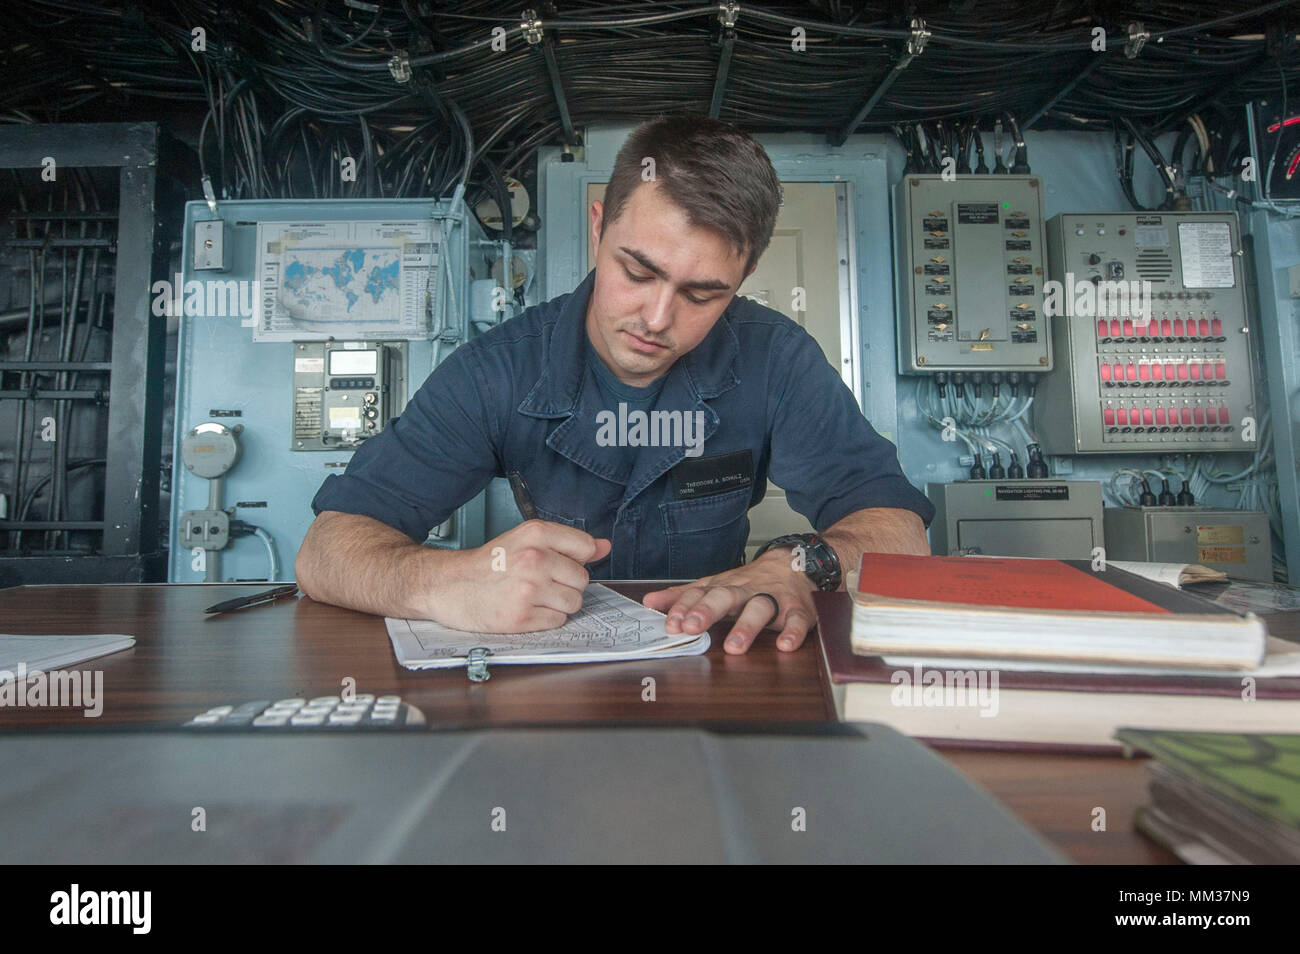 170901-N-ZS023-025 INDIAN OCEAN (Sept. 1, 2017) Quartermaster Seaman Theodore Schulz, a native of Berryville, Virginia, assigned to the navigation department aboard the amphibious assault ship USS America (LHA 6), logs the ship’s bearing in the ship’s bridge while on watch. America, part of the America Amphibious Ready Group, with embarked 15th Marine Expeditionary Unit, is operating in the Indo-Asia Pacific region to strengthen partnerships and serve as a ready-response force for any type of contingency.  (U.S. Navy photo by Mass Communication Specialist Seaman Vance Hand/Released) Stock Photo